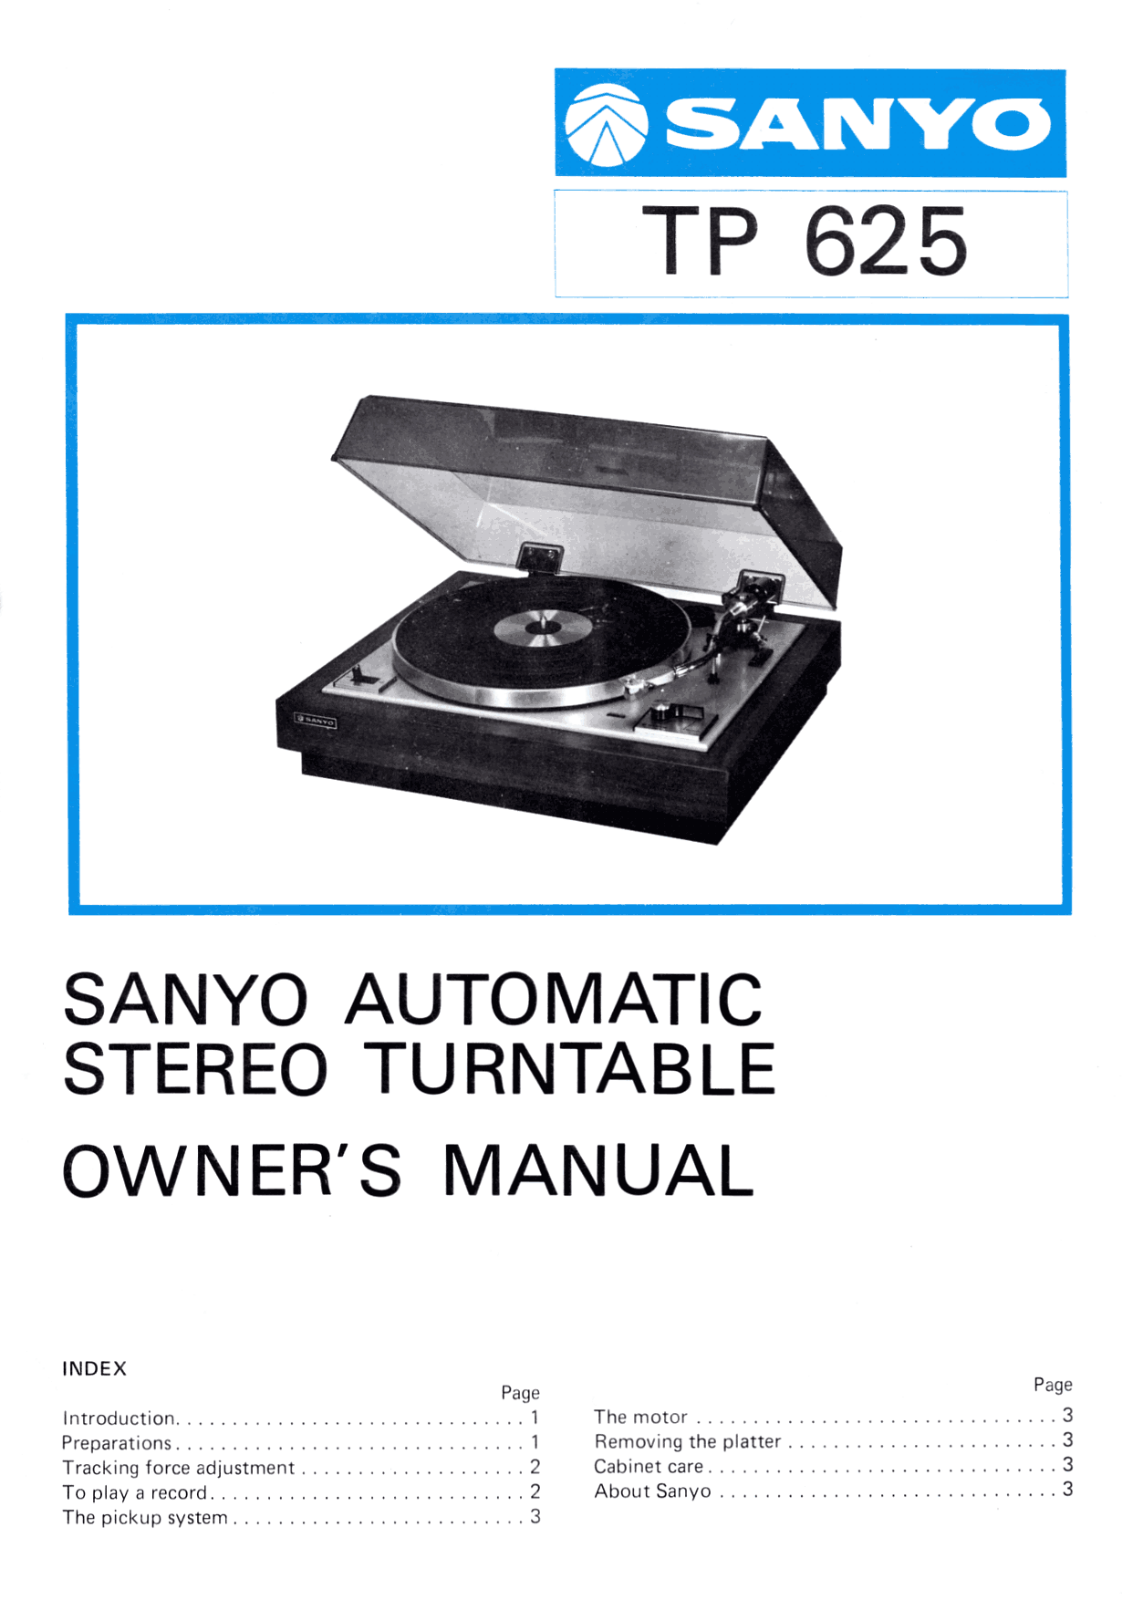 Sanyo TP-625 Owners Manual